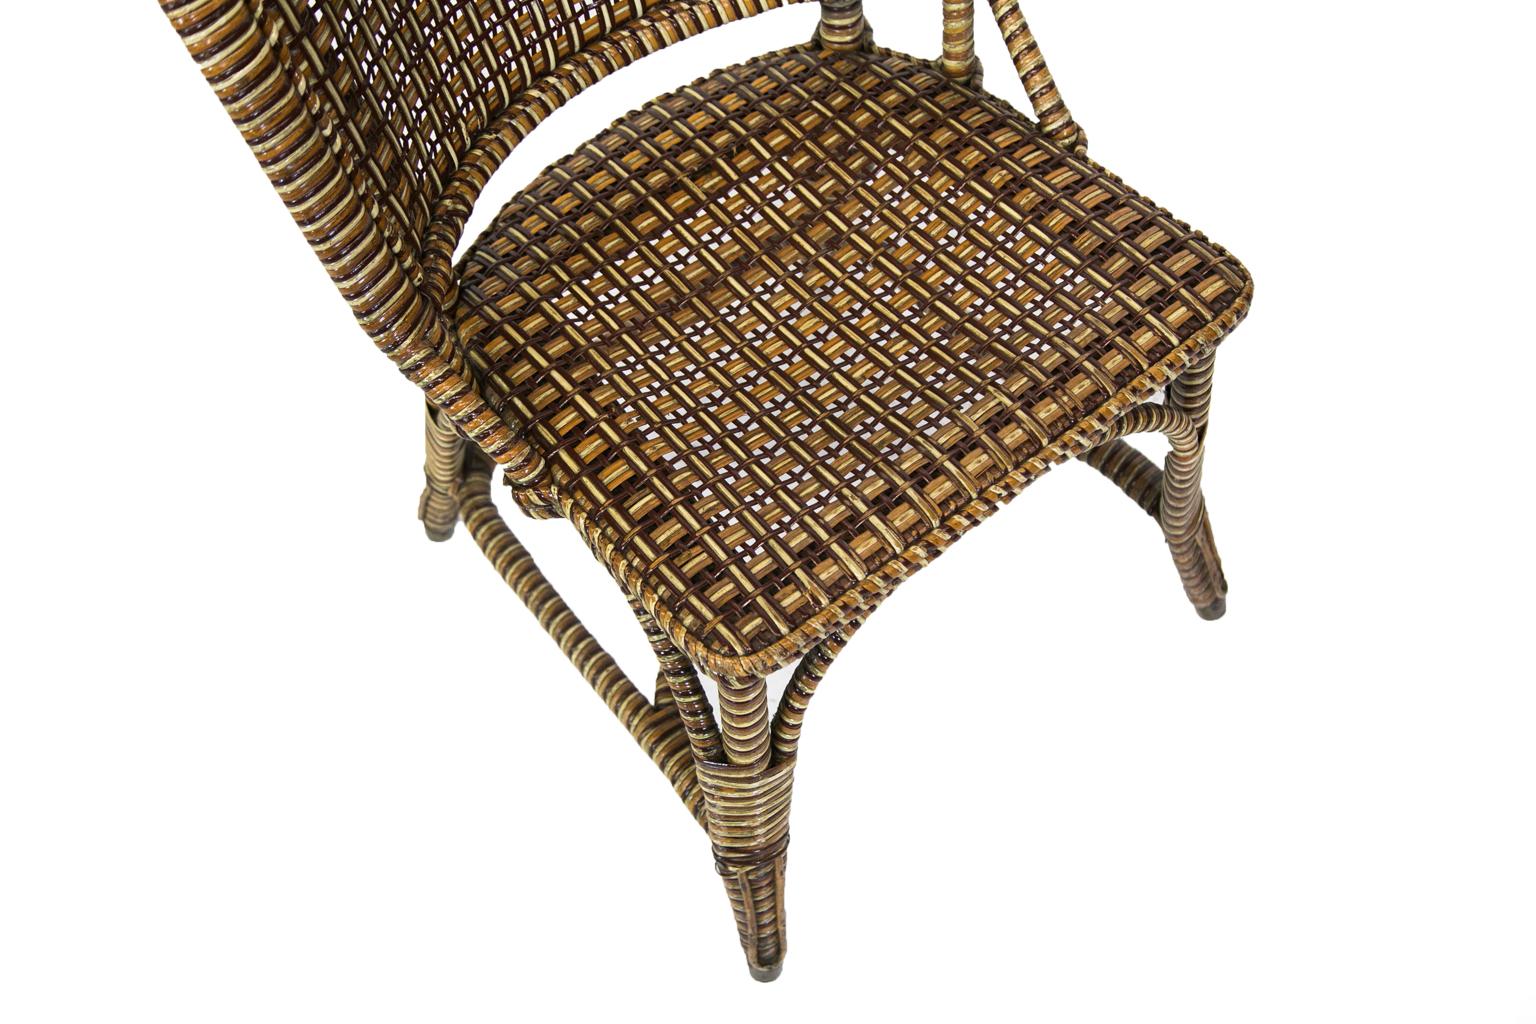 Polychrome rattan side chair has a signed copper plaque, “Aster Registered”. There are angled seat braces and curved arched leg supports with a crinoline style stretcher. The back is framed with split bamboo on the back side and spiral rolled rattan